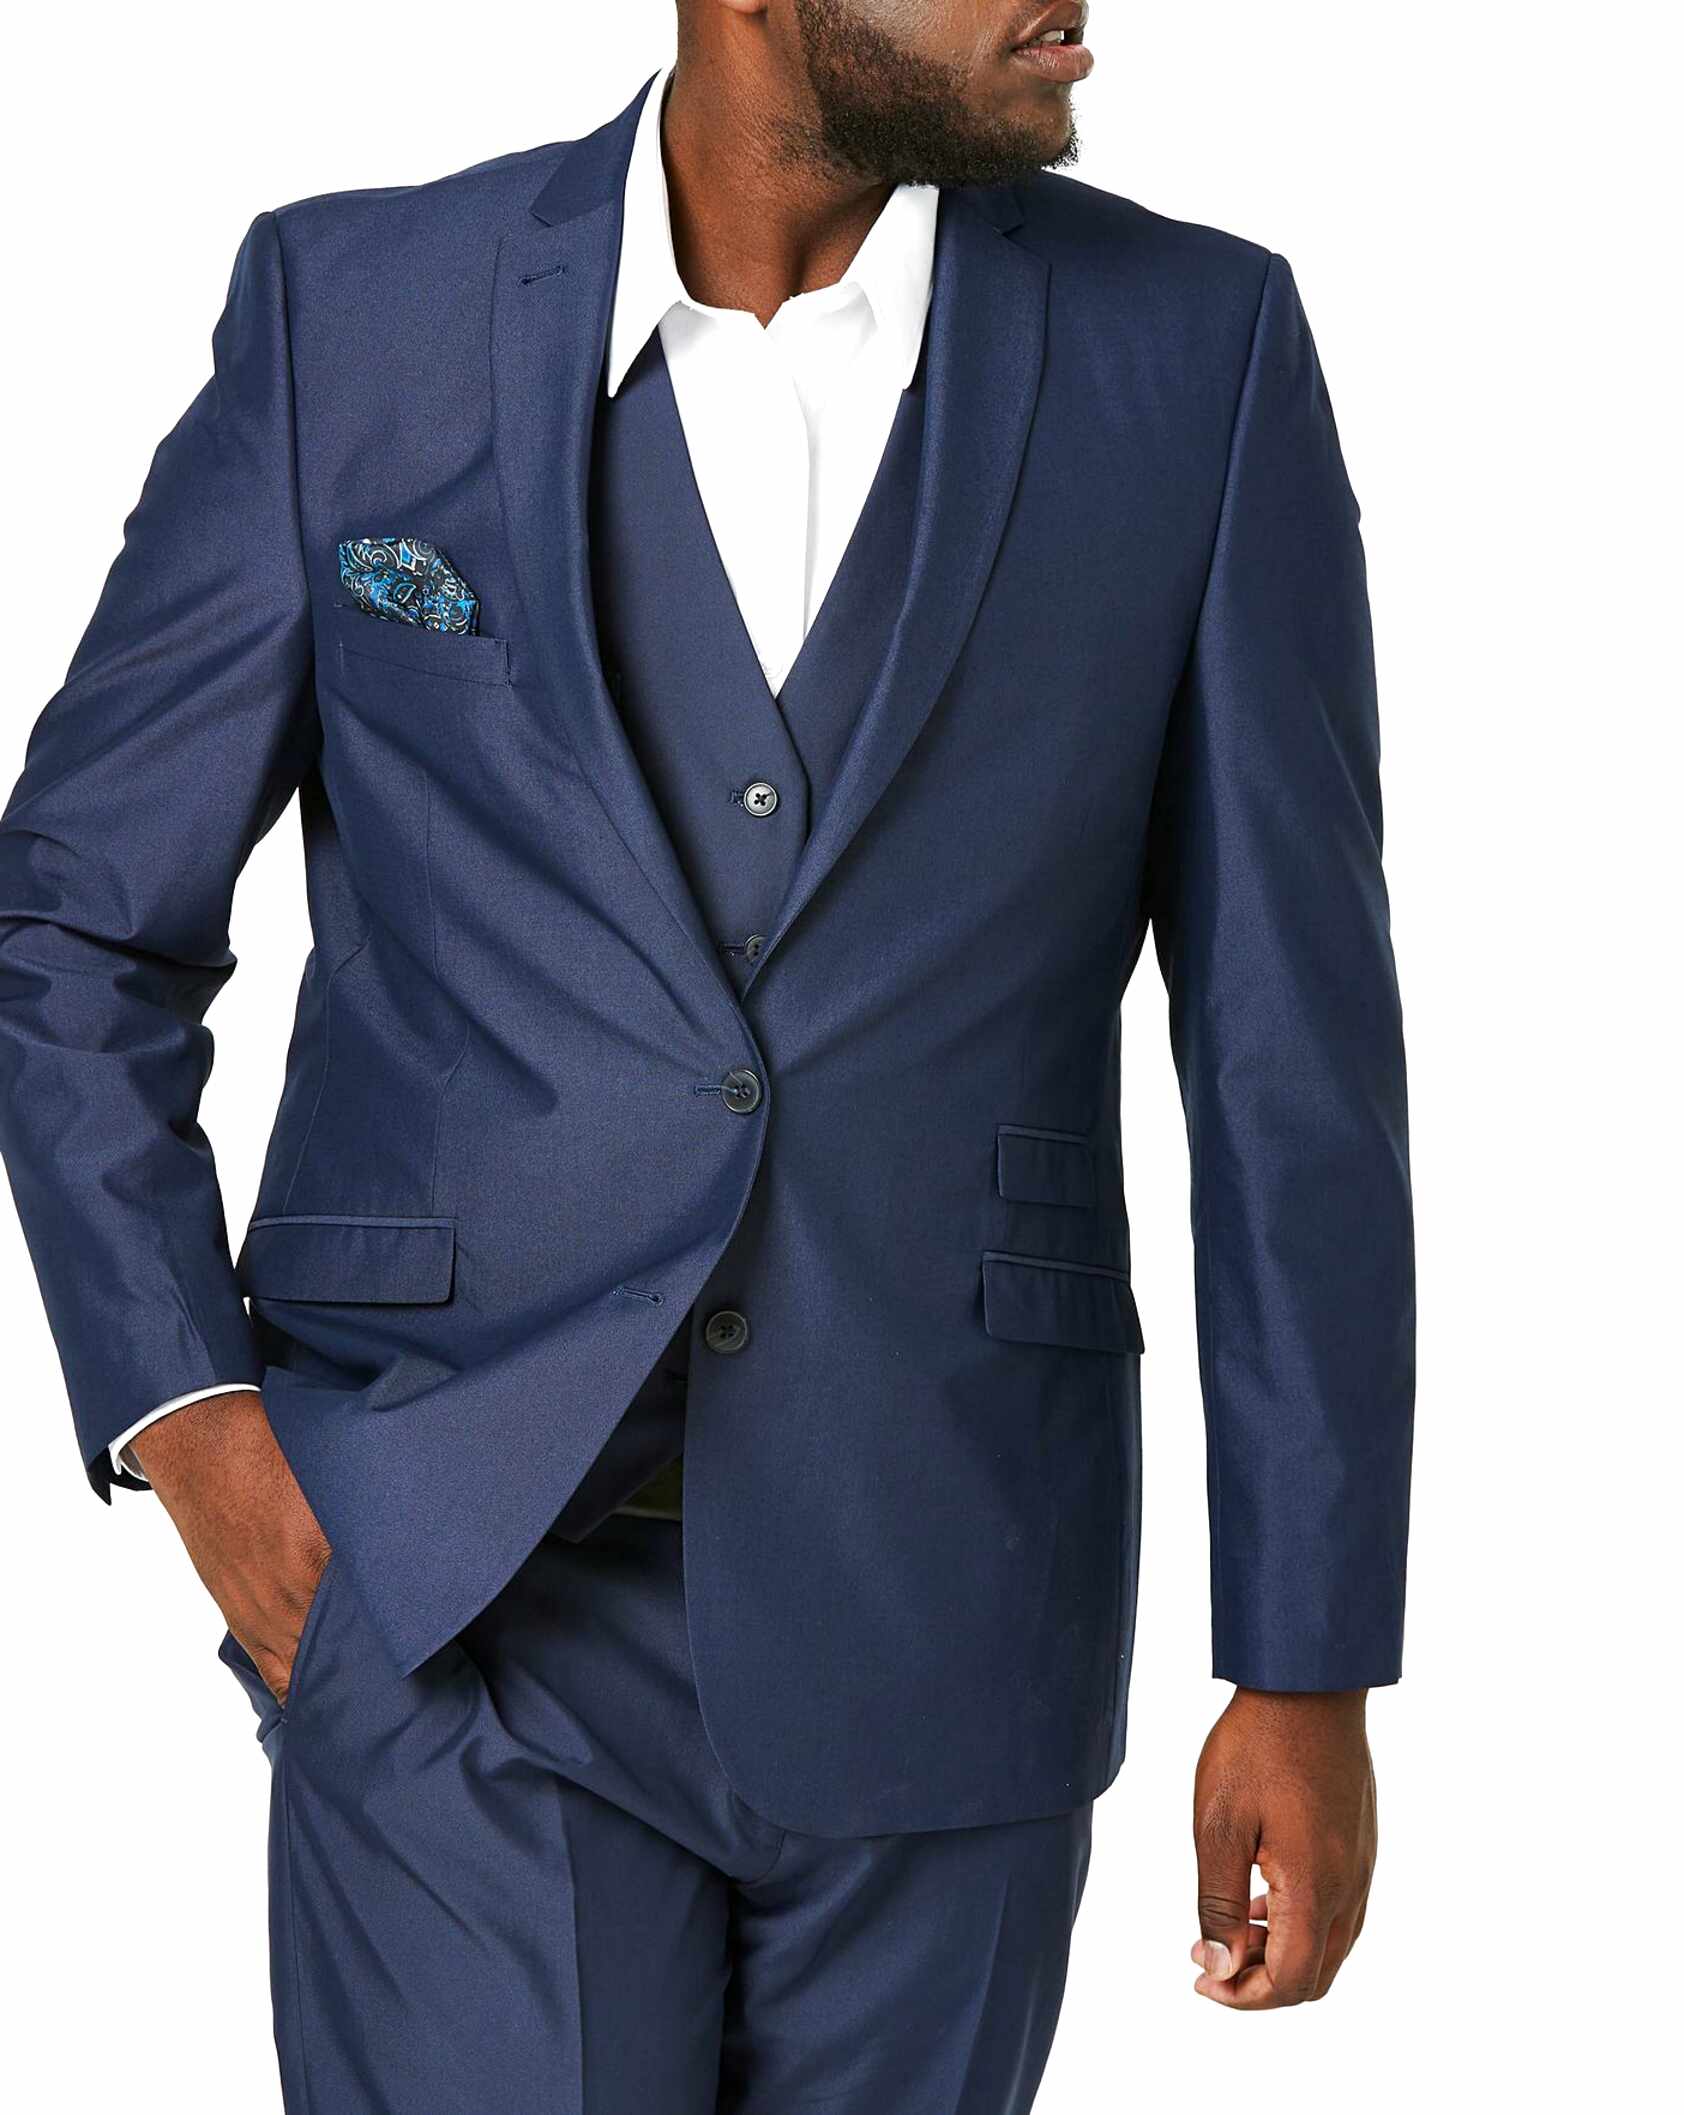 Tonic Suit for sale in UK | 57 used Tonic Suits